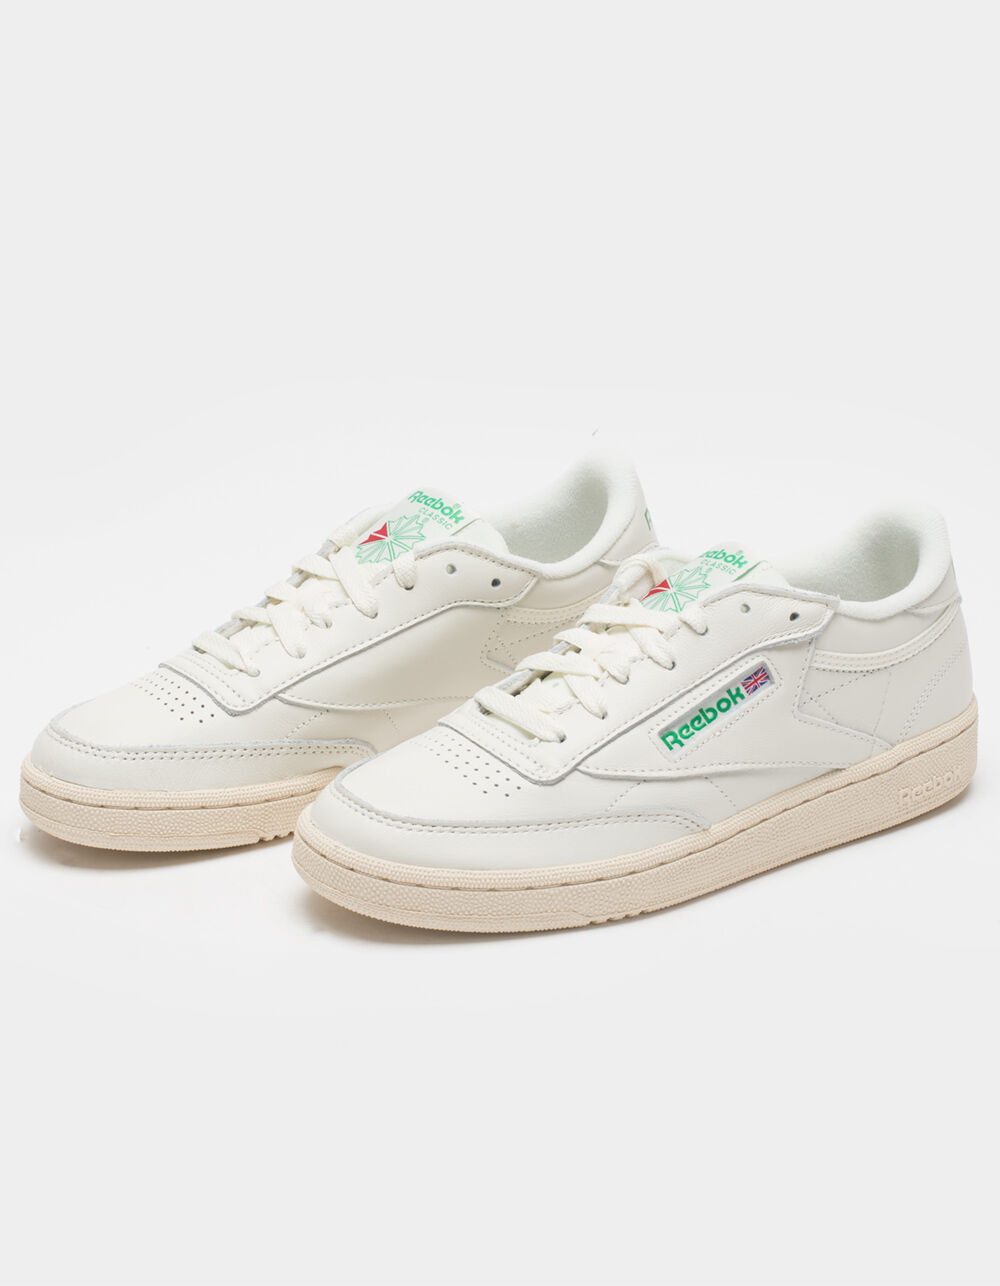 Rectangle educator robbery REEBOK Club C 85 Model Vintage Womens Shoes - OFF WHITE | Tillys